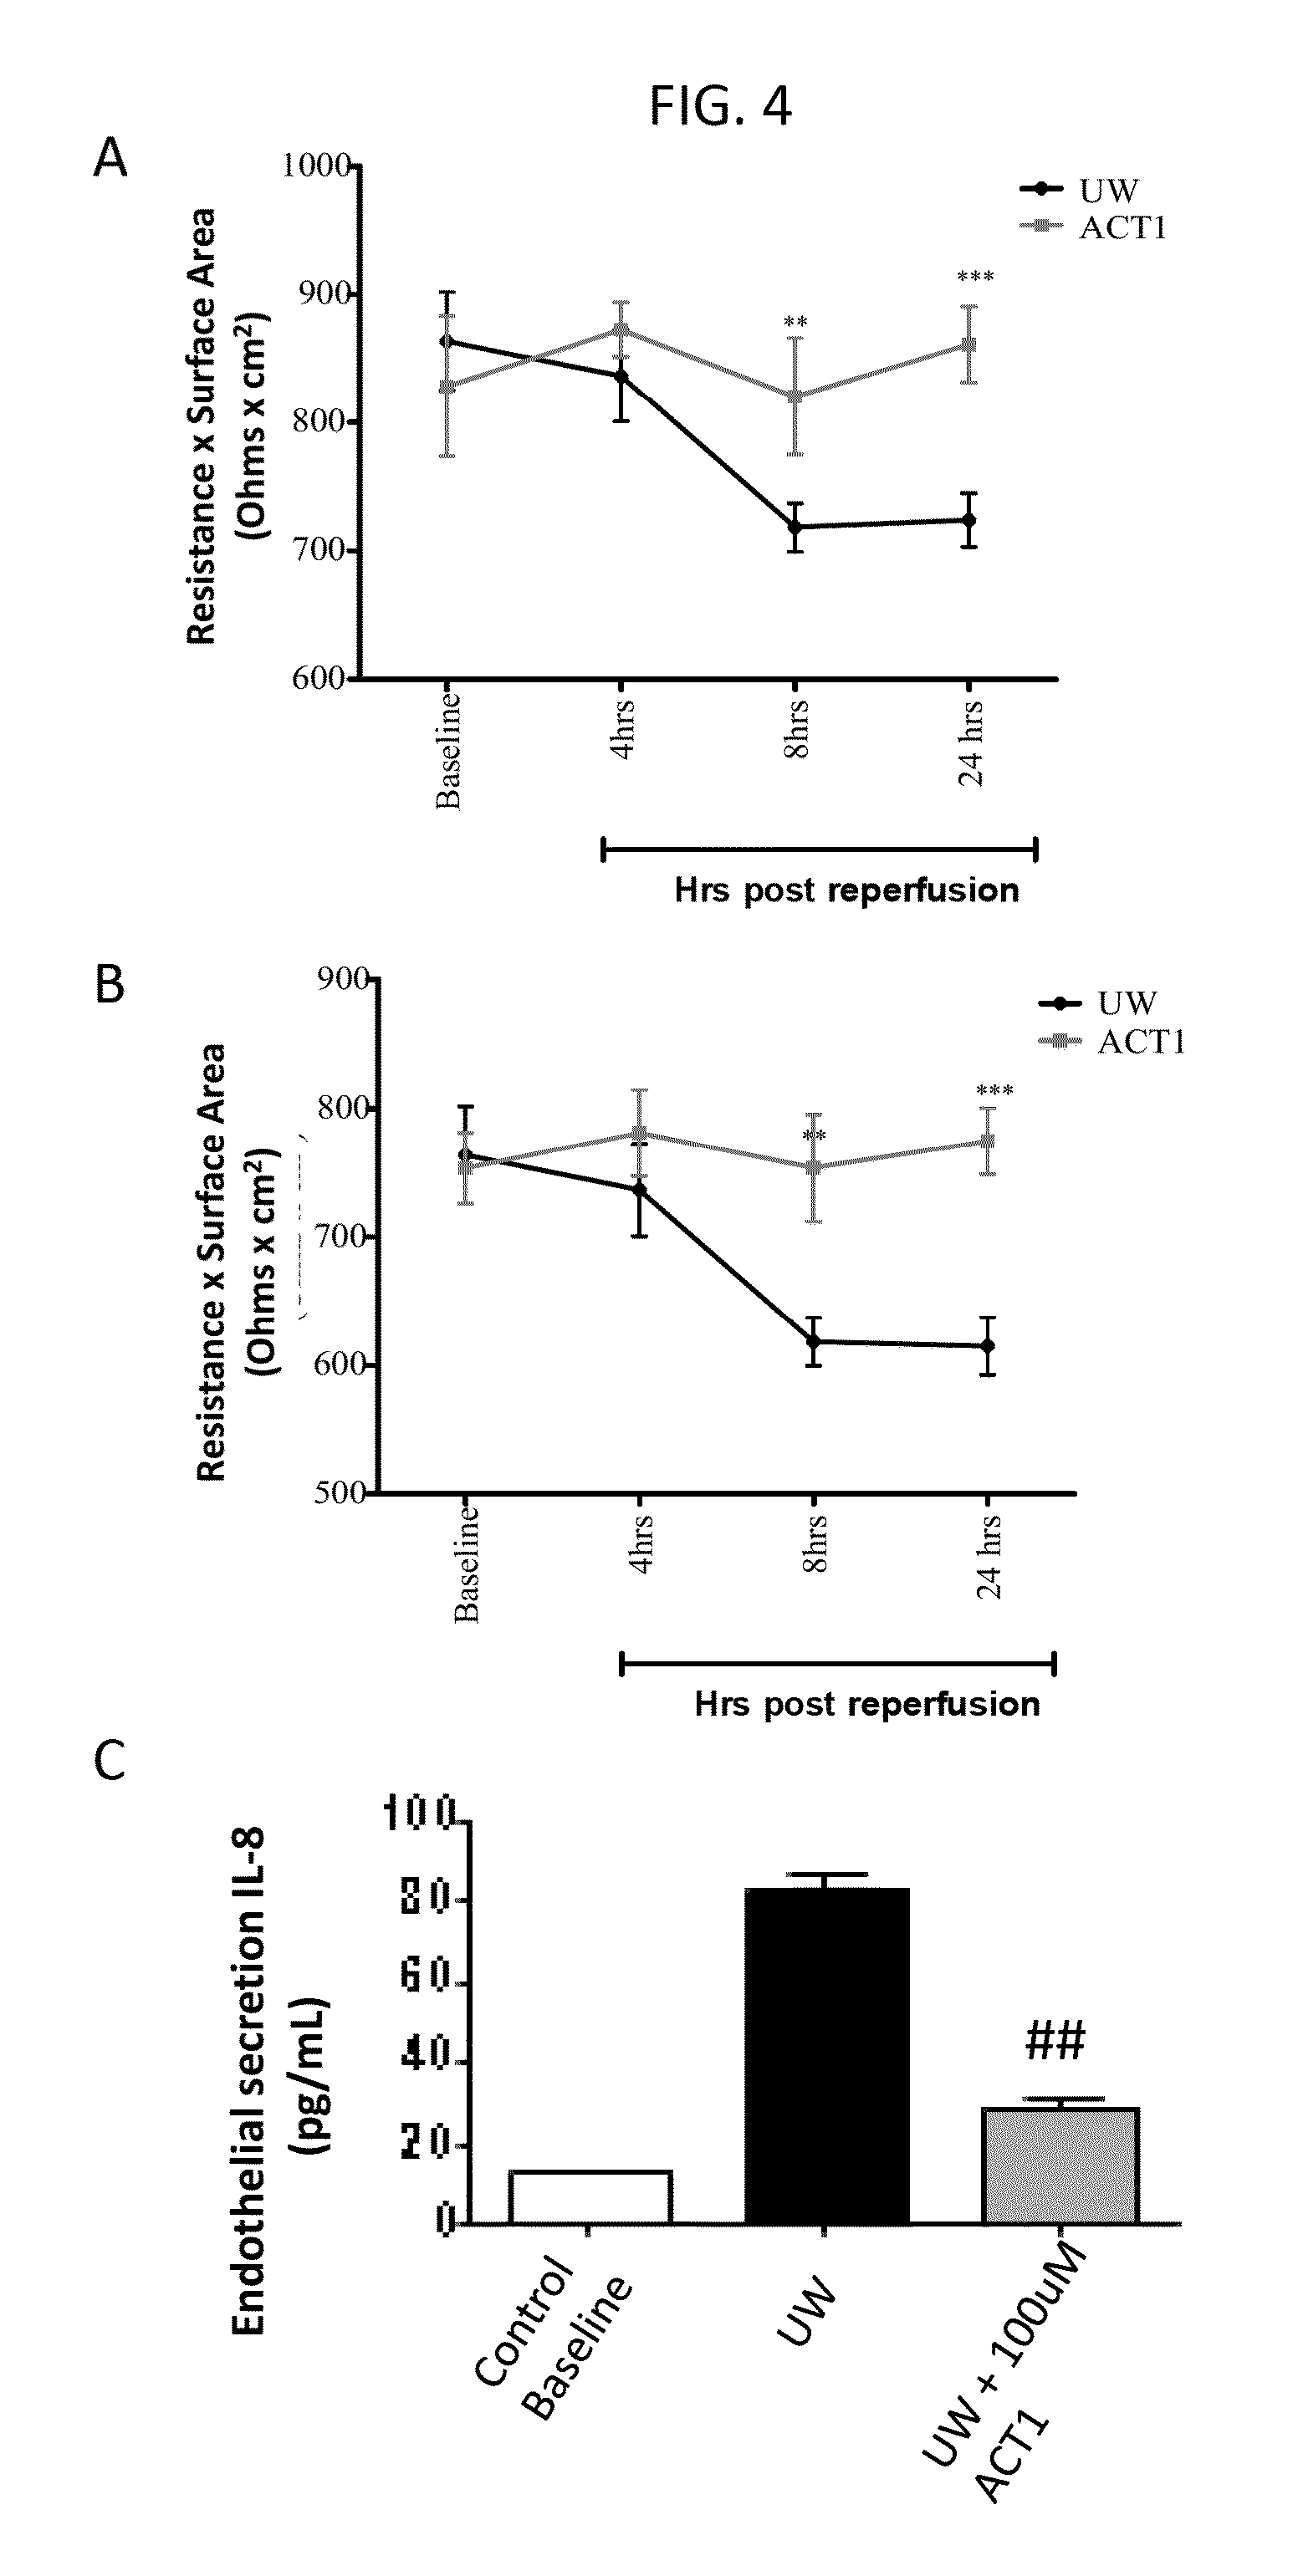 Alpha connexin c-terminal (ACT) peptides for use in transplant